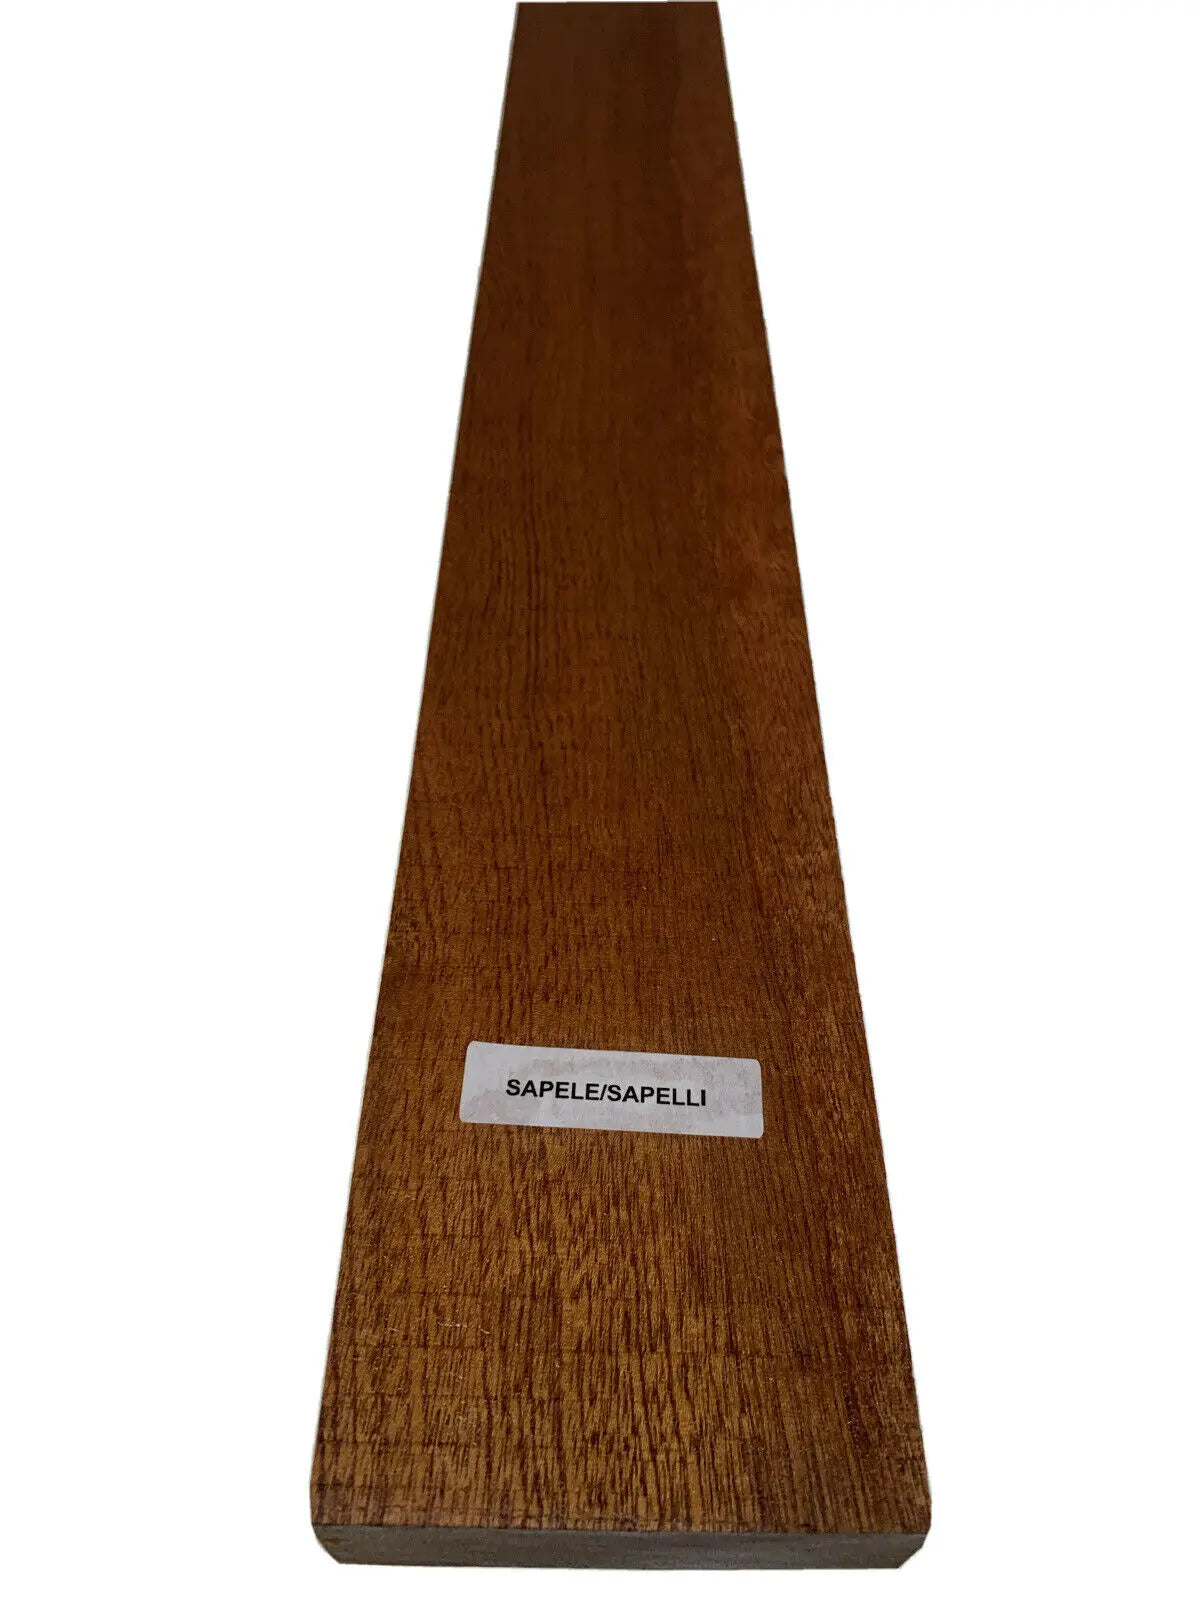 Sapele Thin Stock Lumber Boards Wood Crafts - Exotic Wood Zone